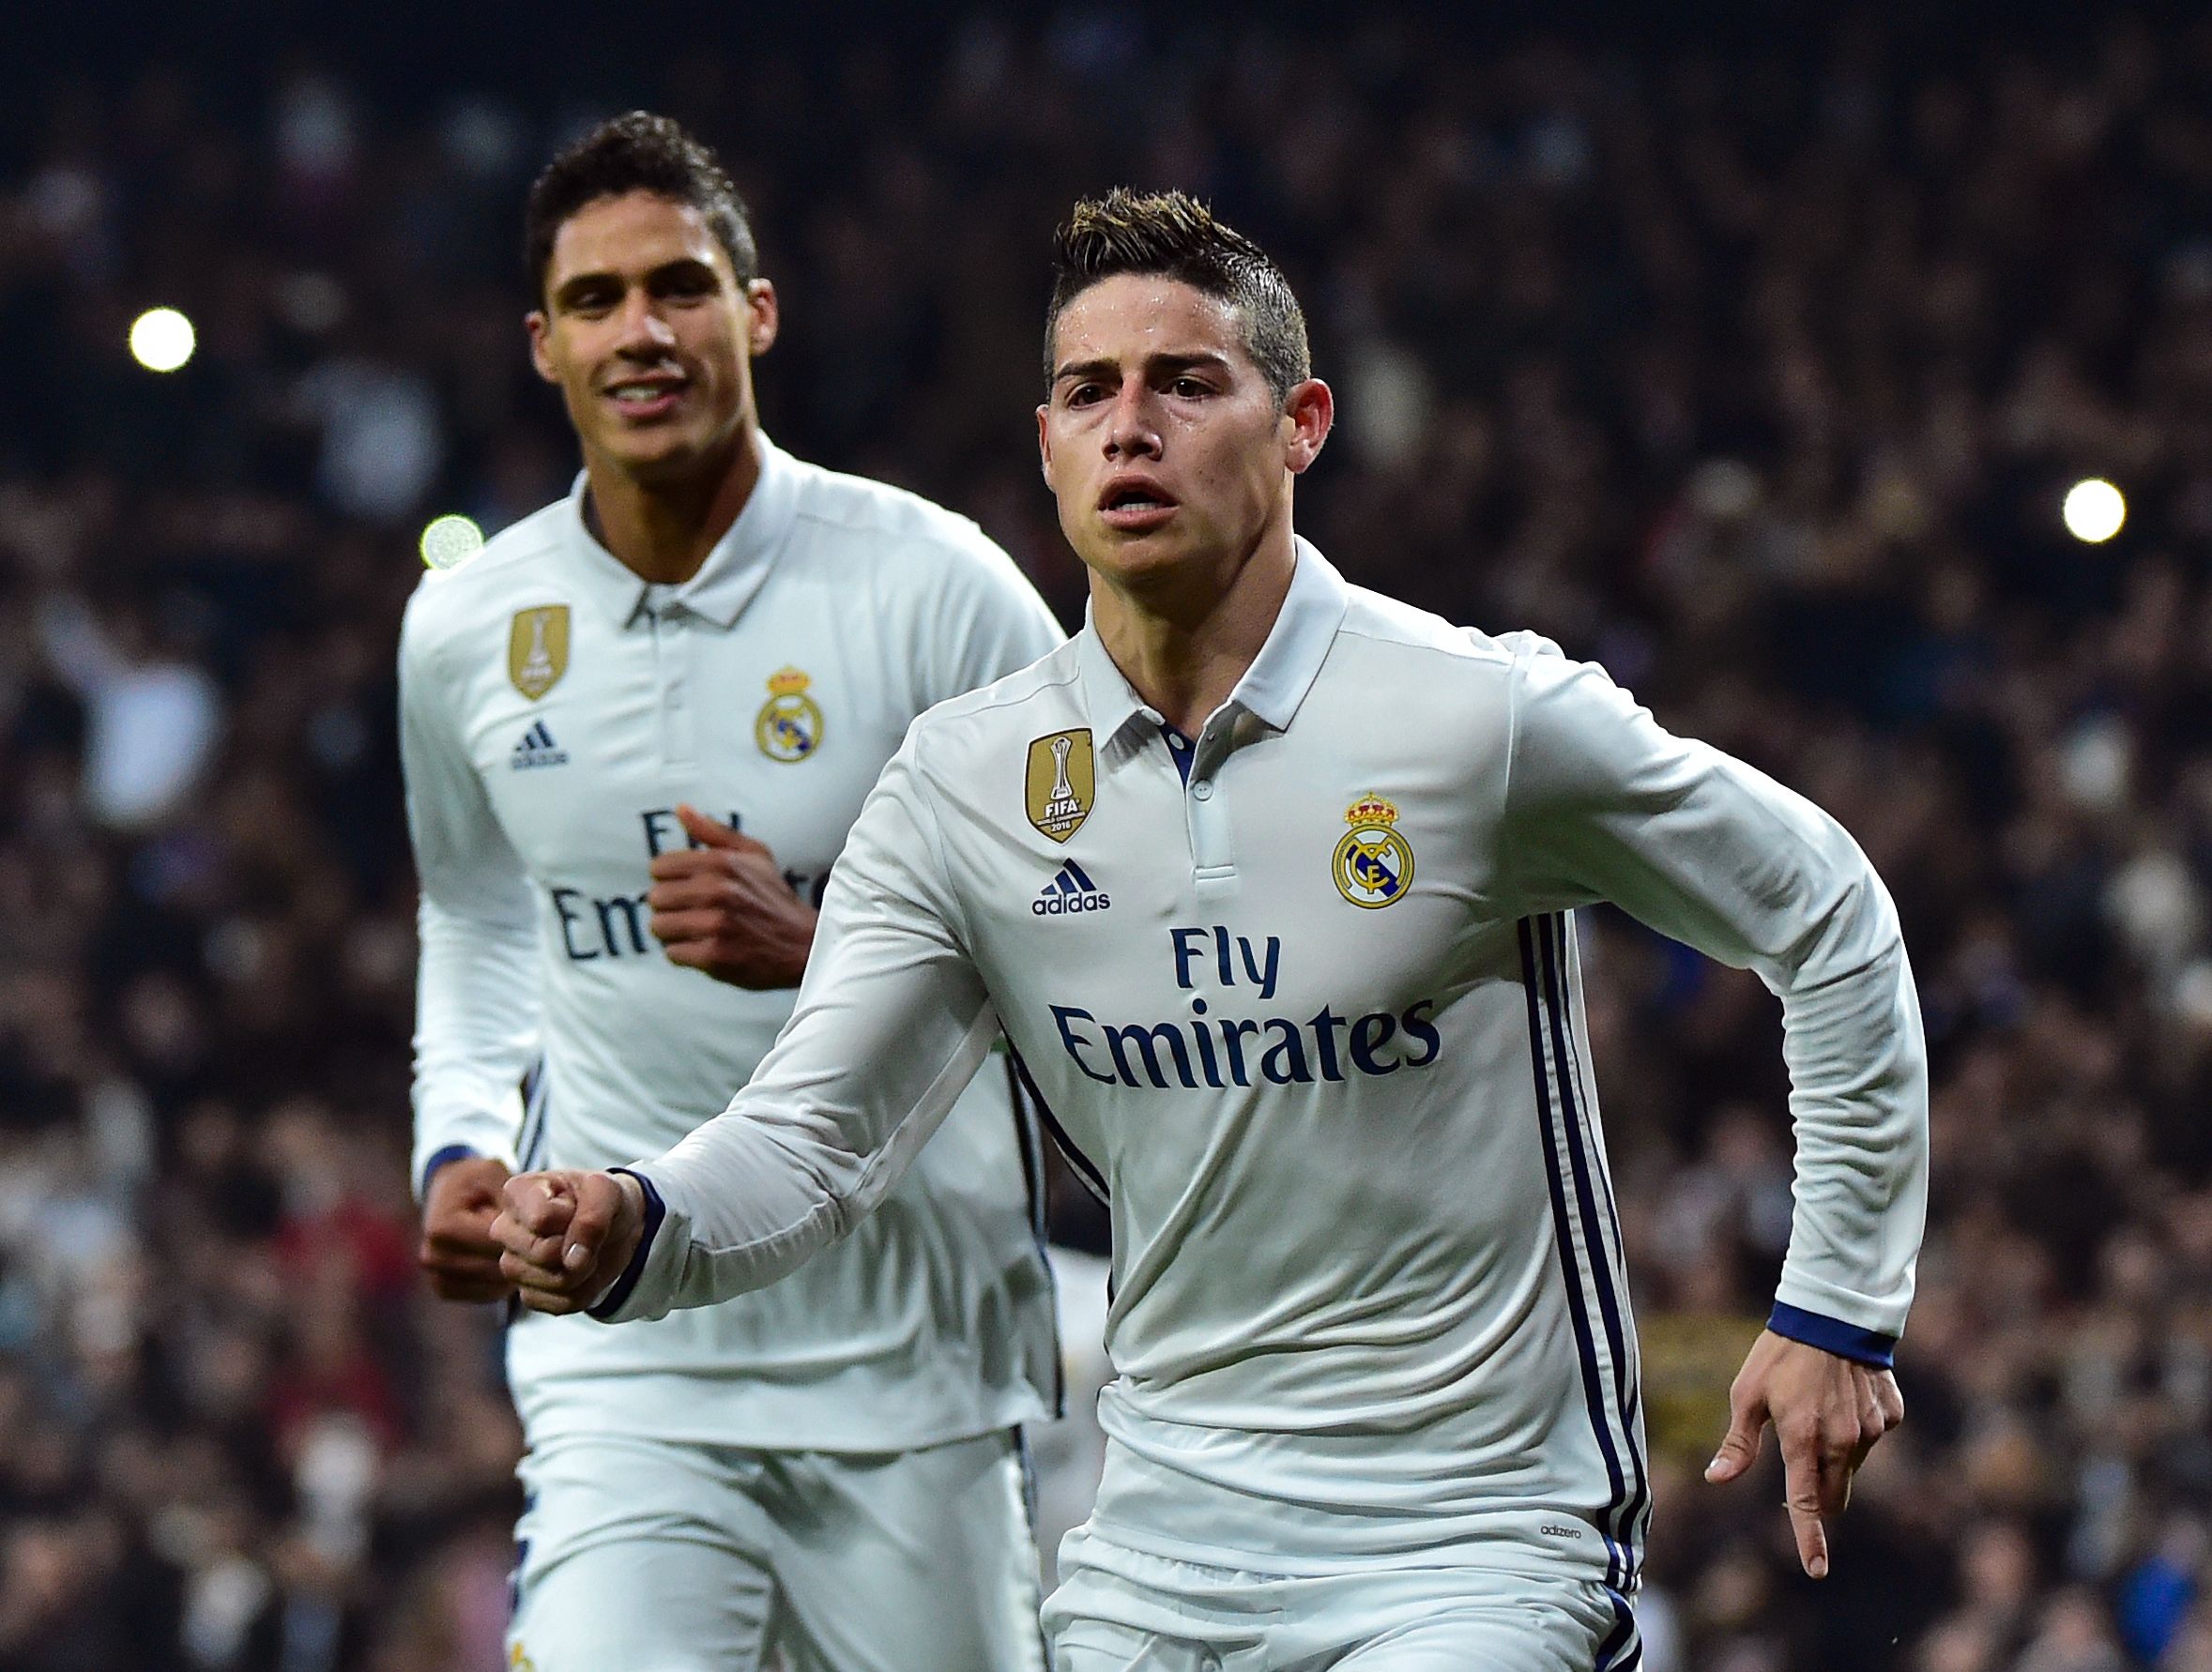 Football: James double helps Real beat Sevilla in King's Cup